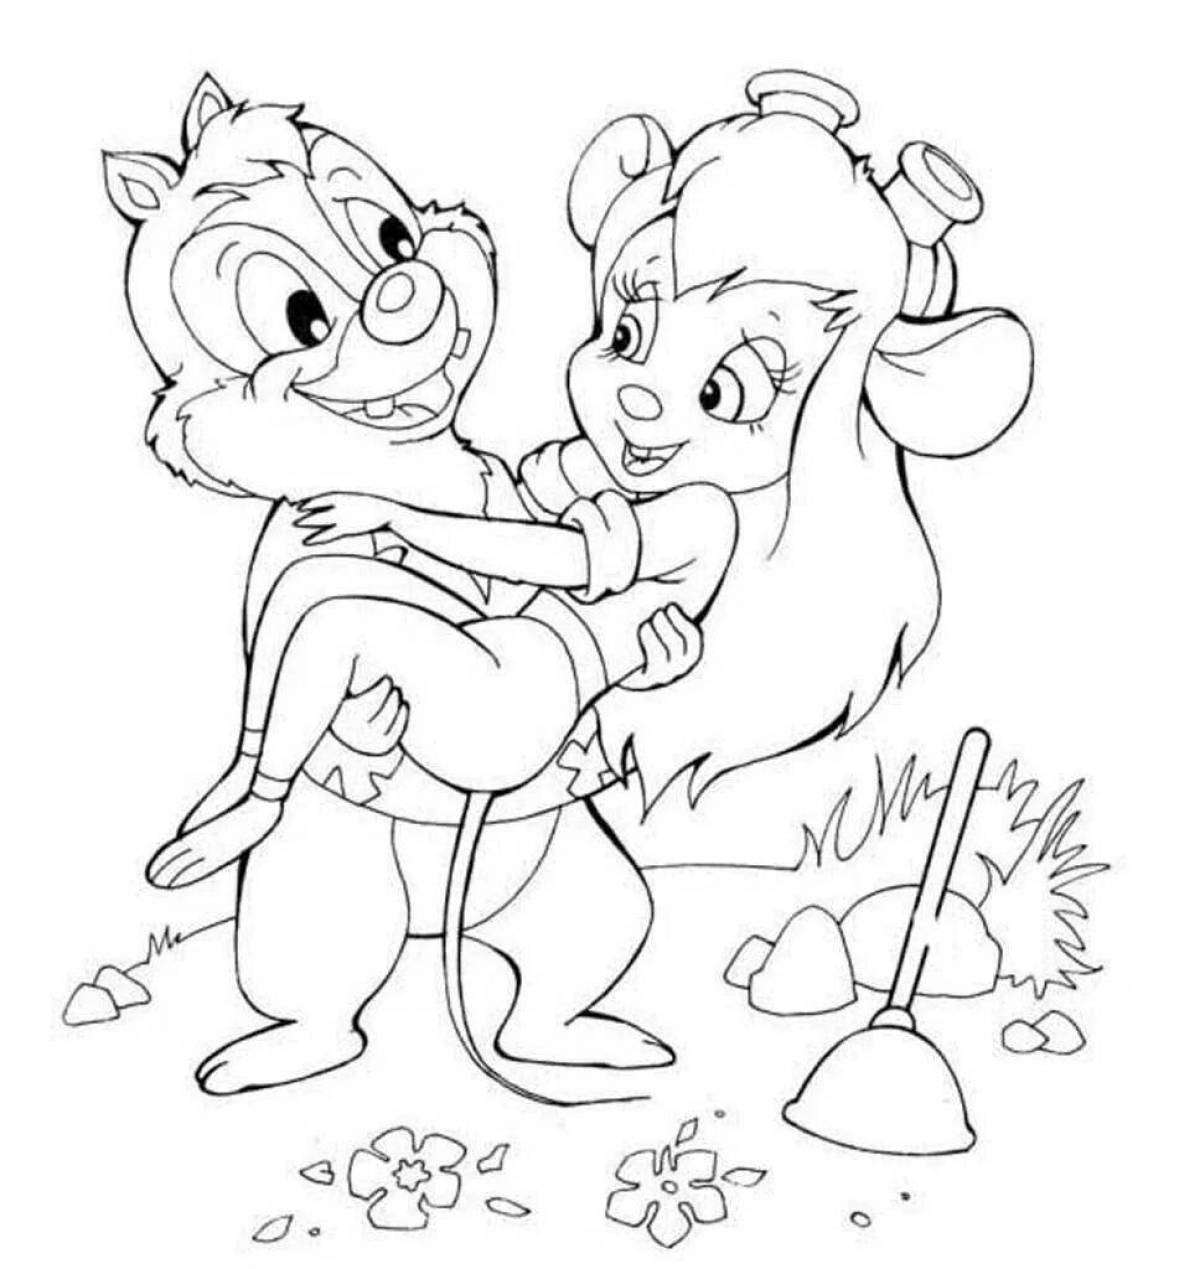 Playful coloring book from the 90s